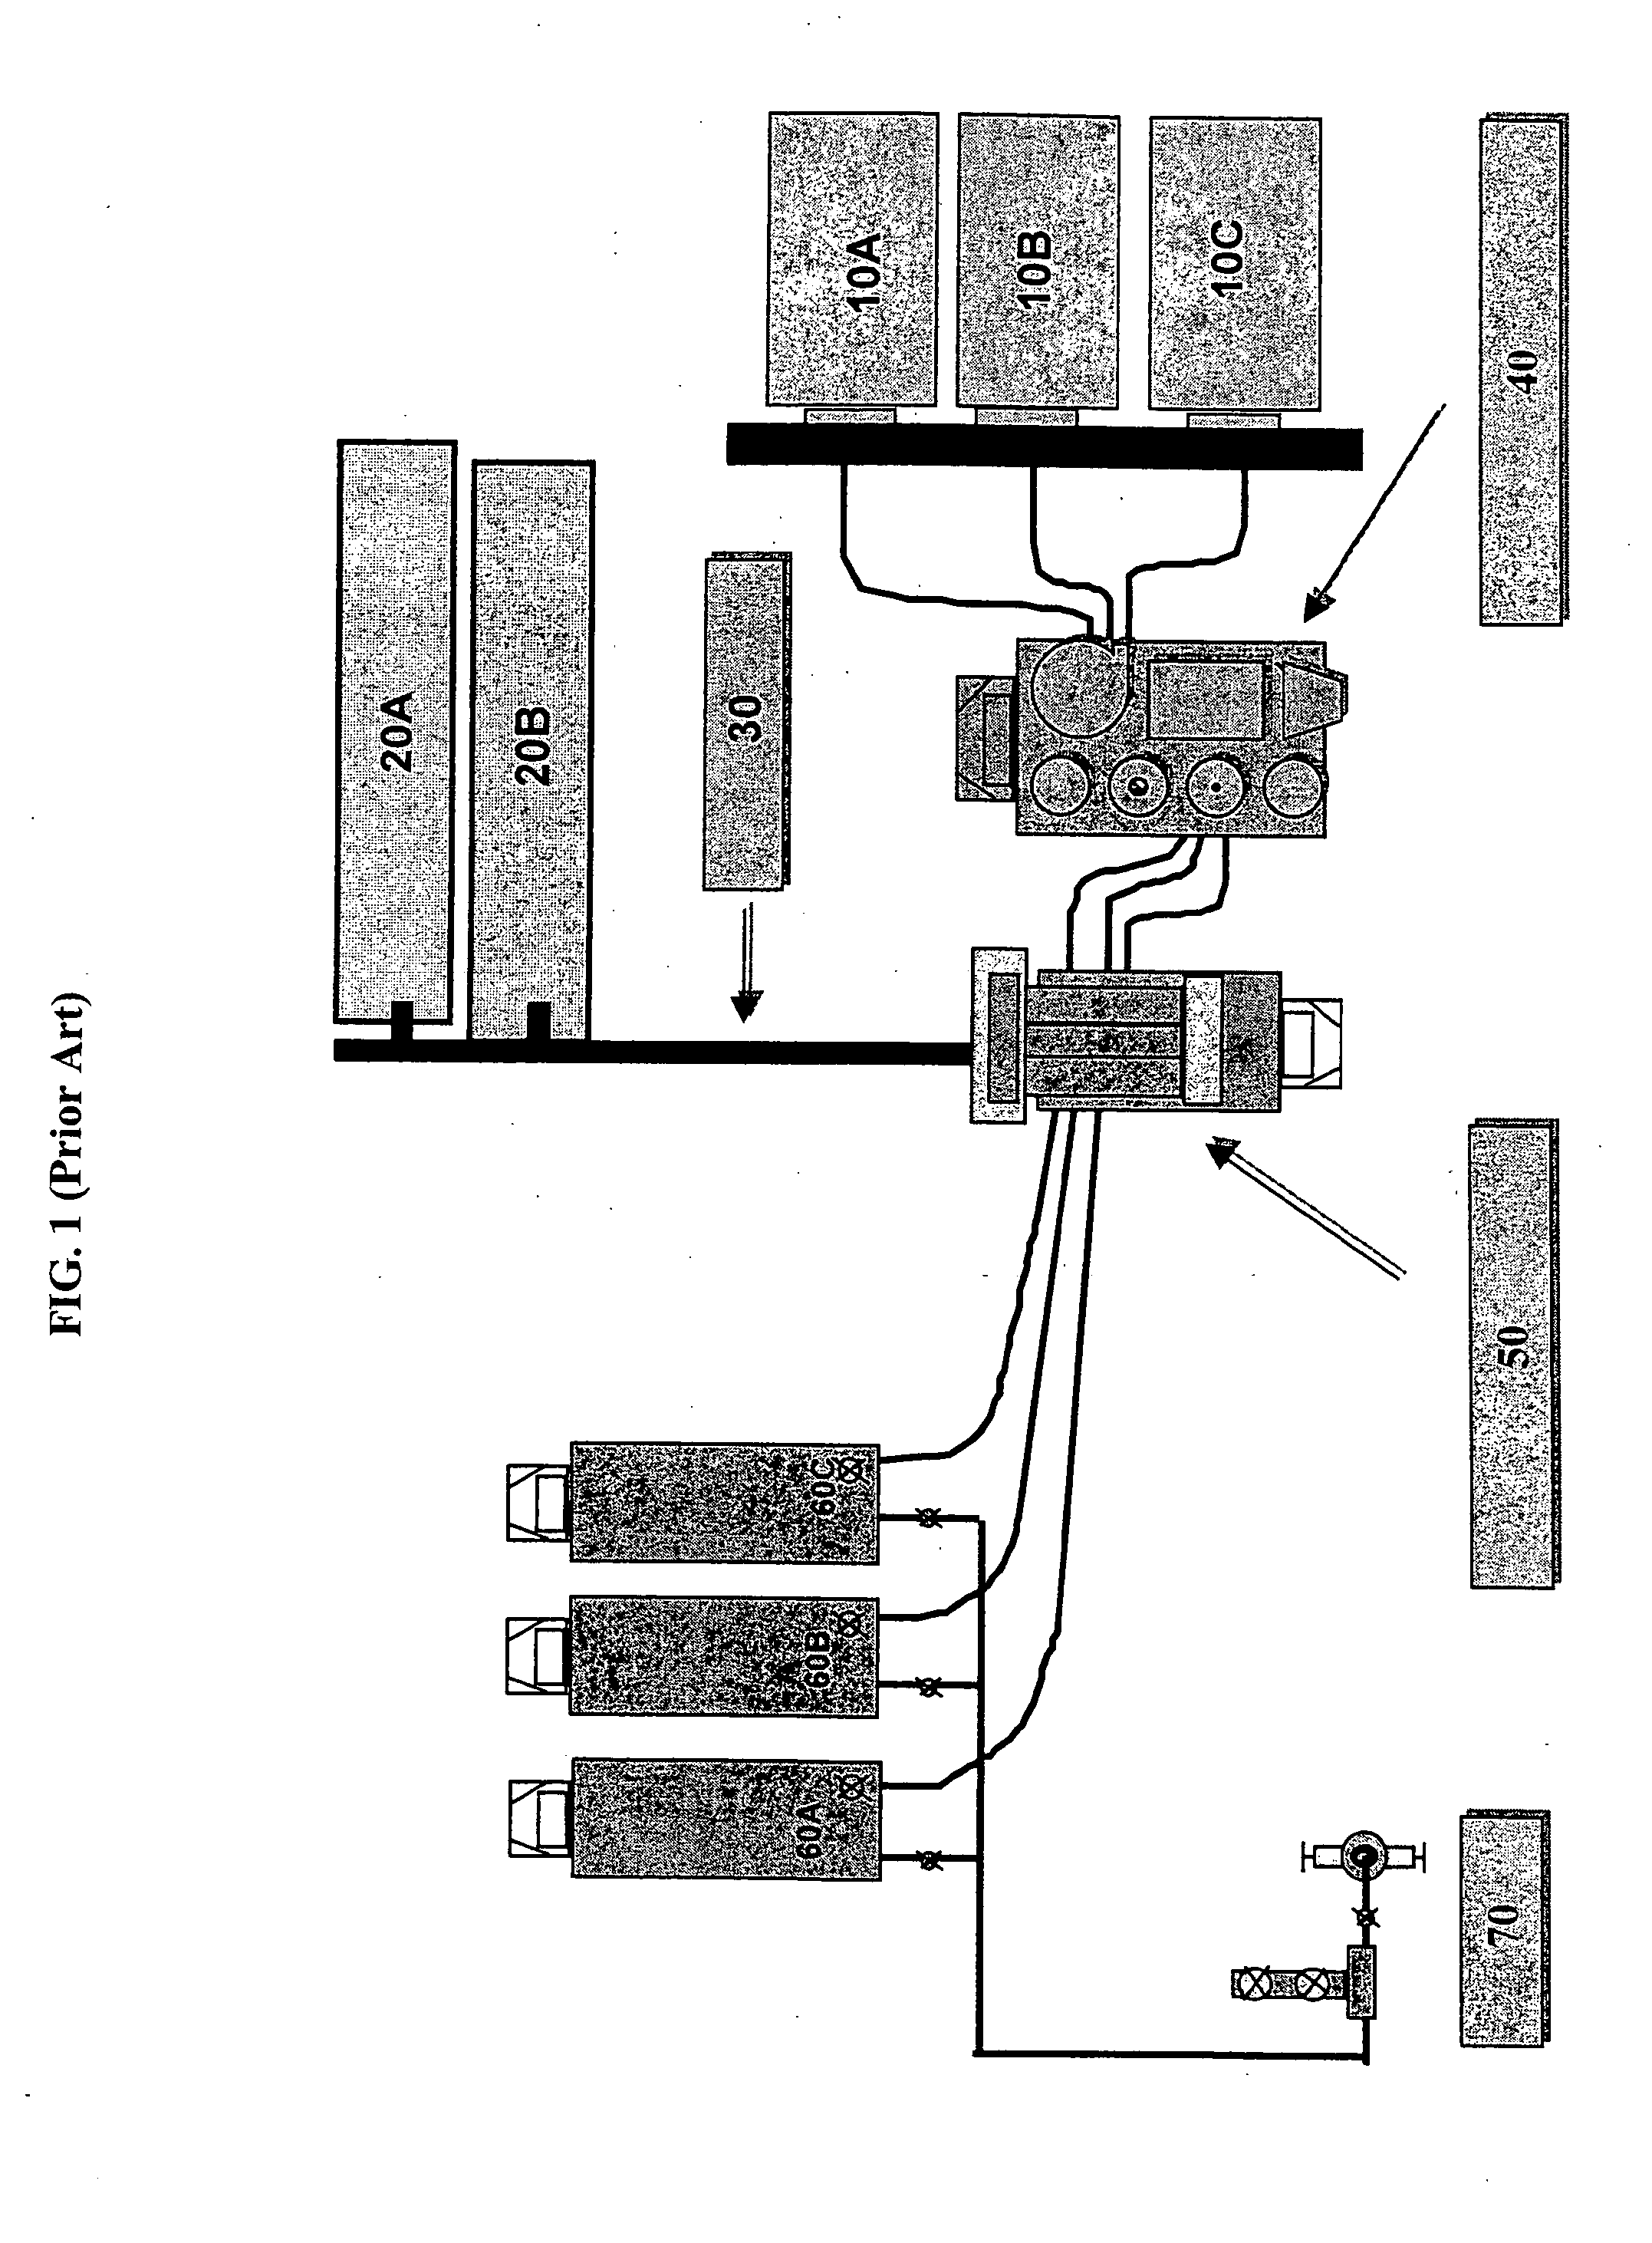 Methods and compositions of a storable relatively lightweight proppant slurry for hydraulic fracturing and gravel packing applications